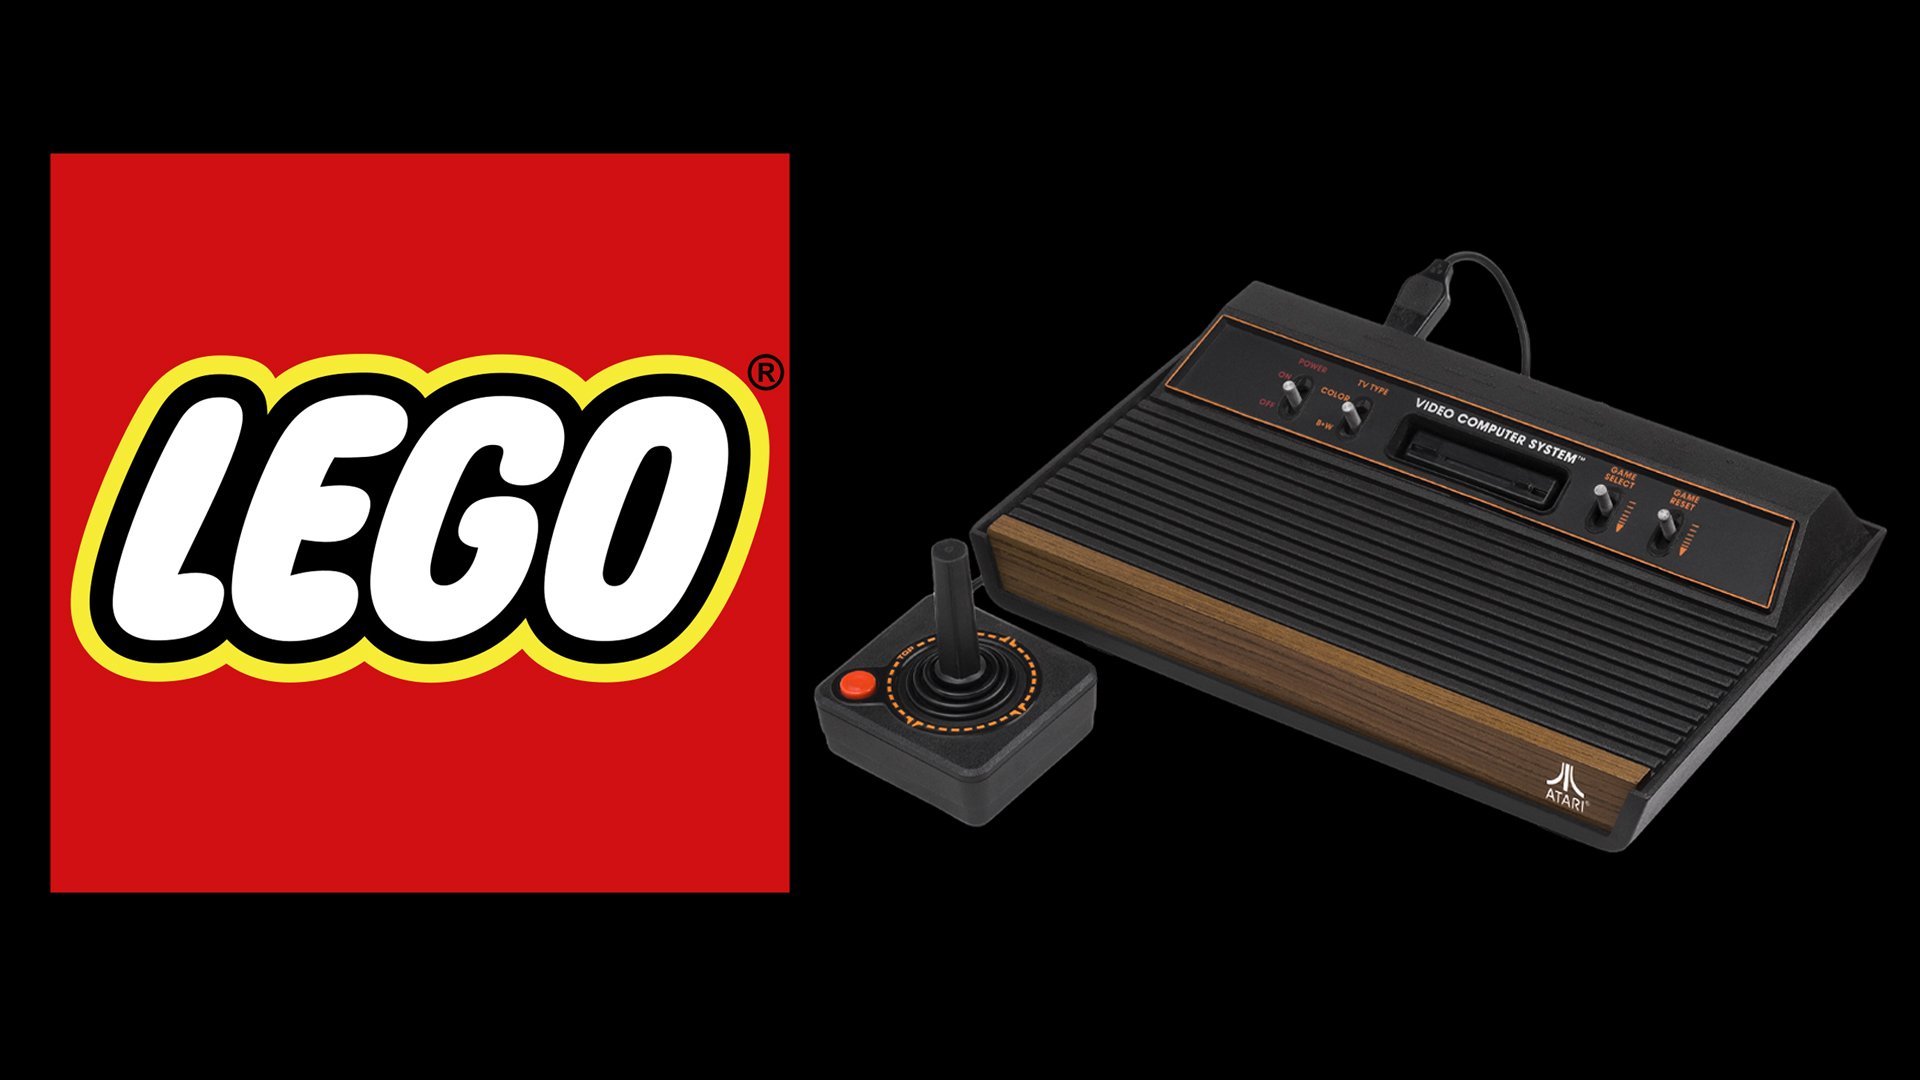 A Lego Atari VCS / 2600 50th anniversary set has been spotted online